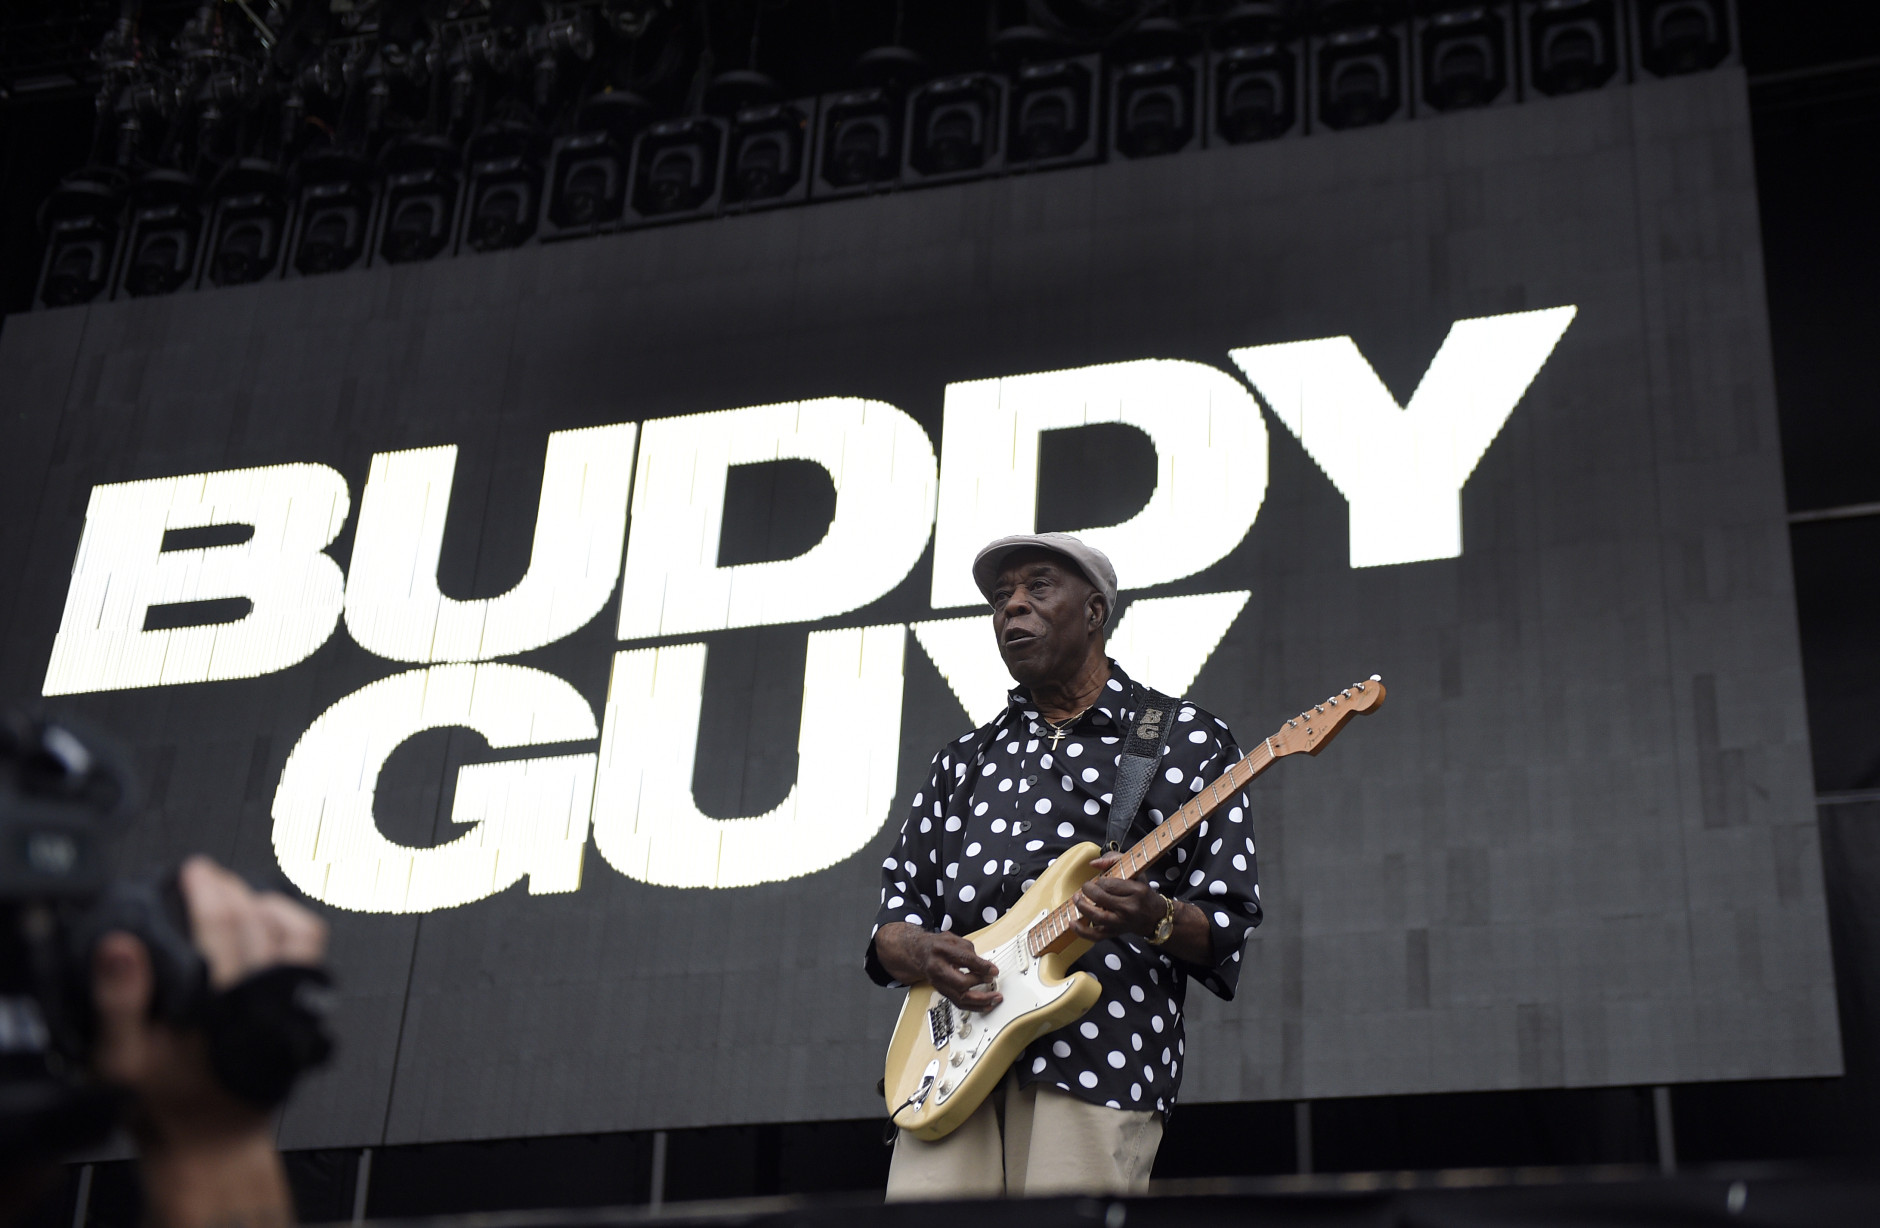 July 30, 2015, blues musician Buddy Guy turns 79. In this image, Buddy Guy performs at RFK Stadium on Saturday, July 4, 2015, in Washington. (Photo by Nick Wass/Invision/AP)